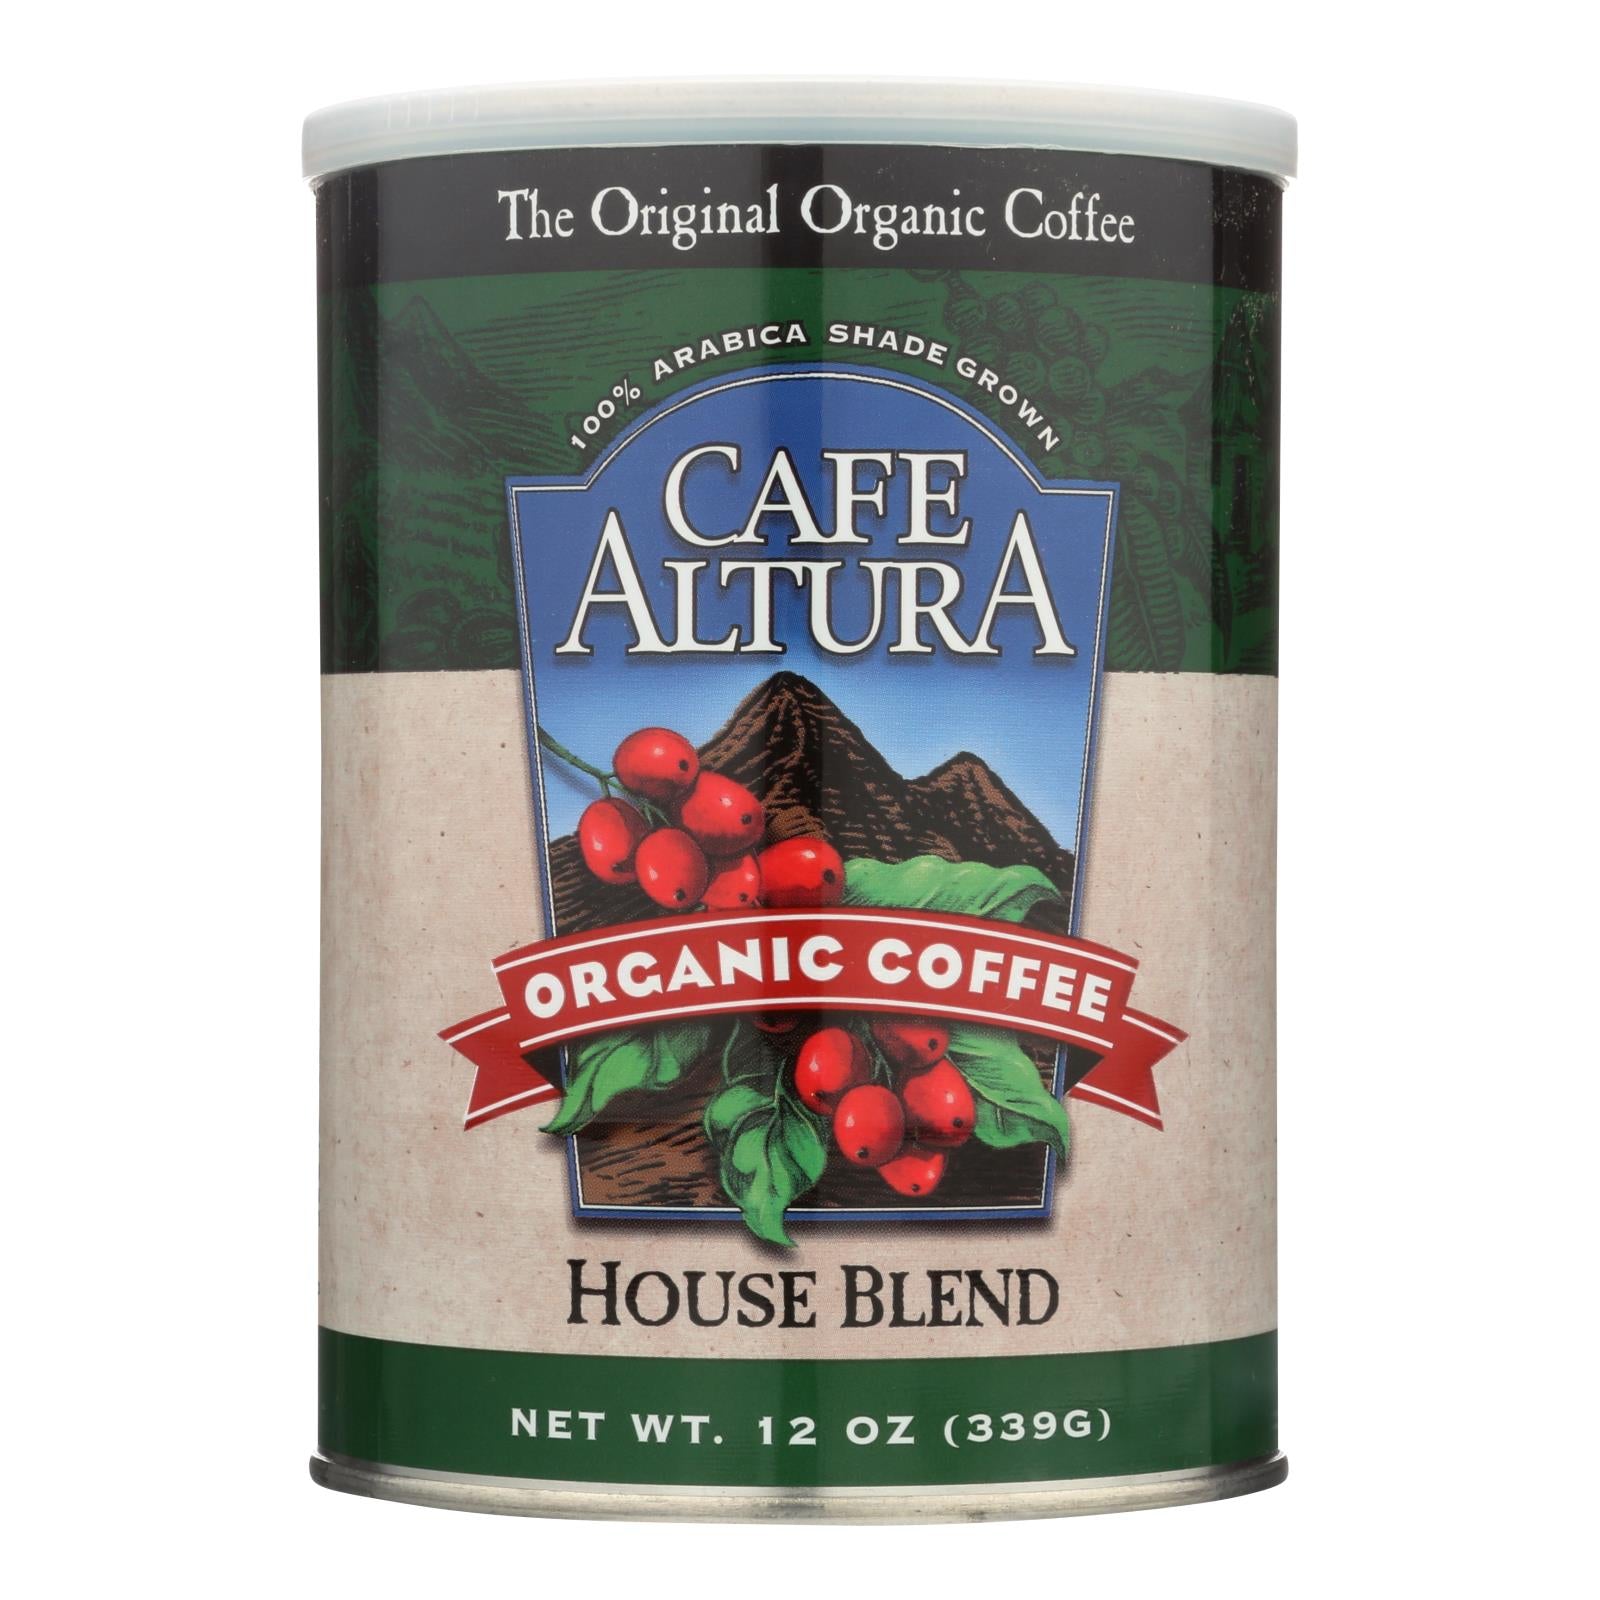 Cafe Altura - Organic Ground Coffee - House Blend - Case Of 6 - 12 Oz.